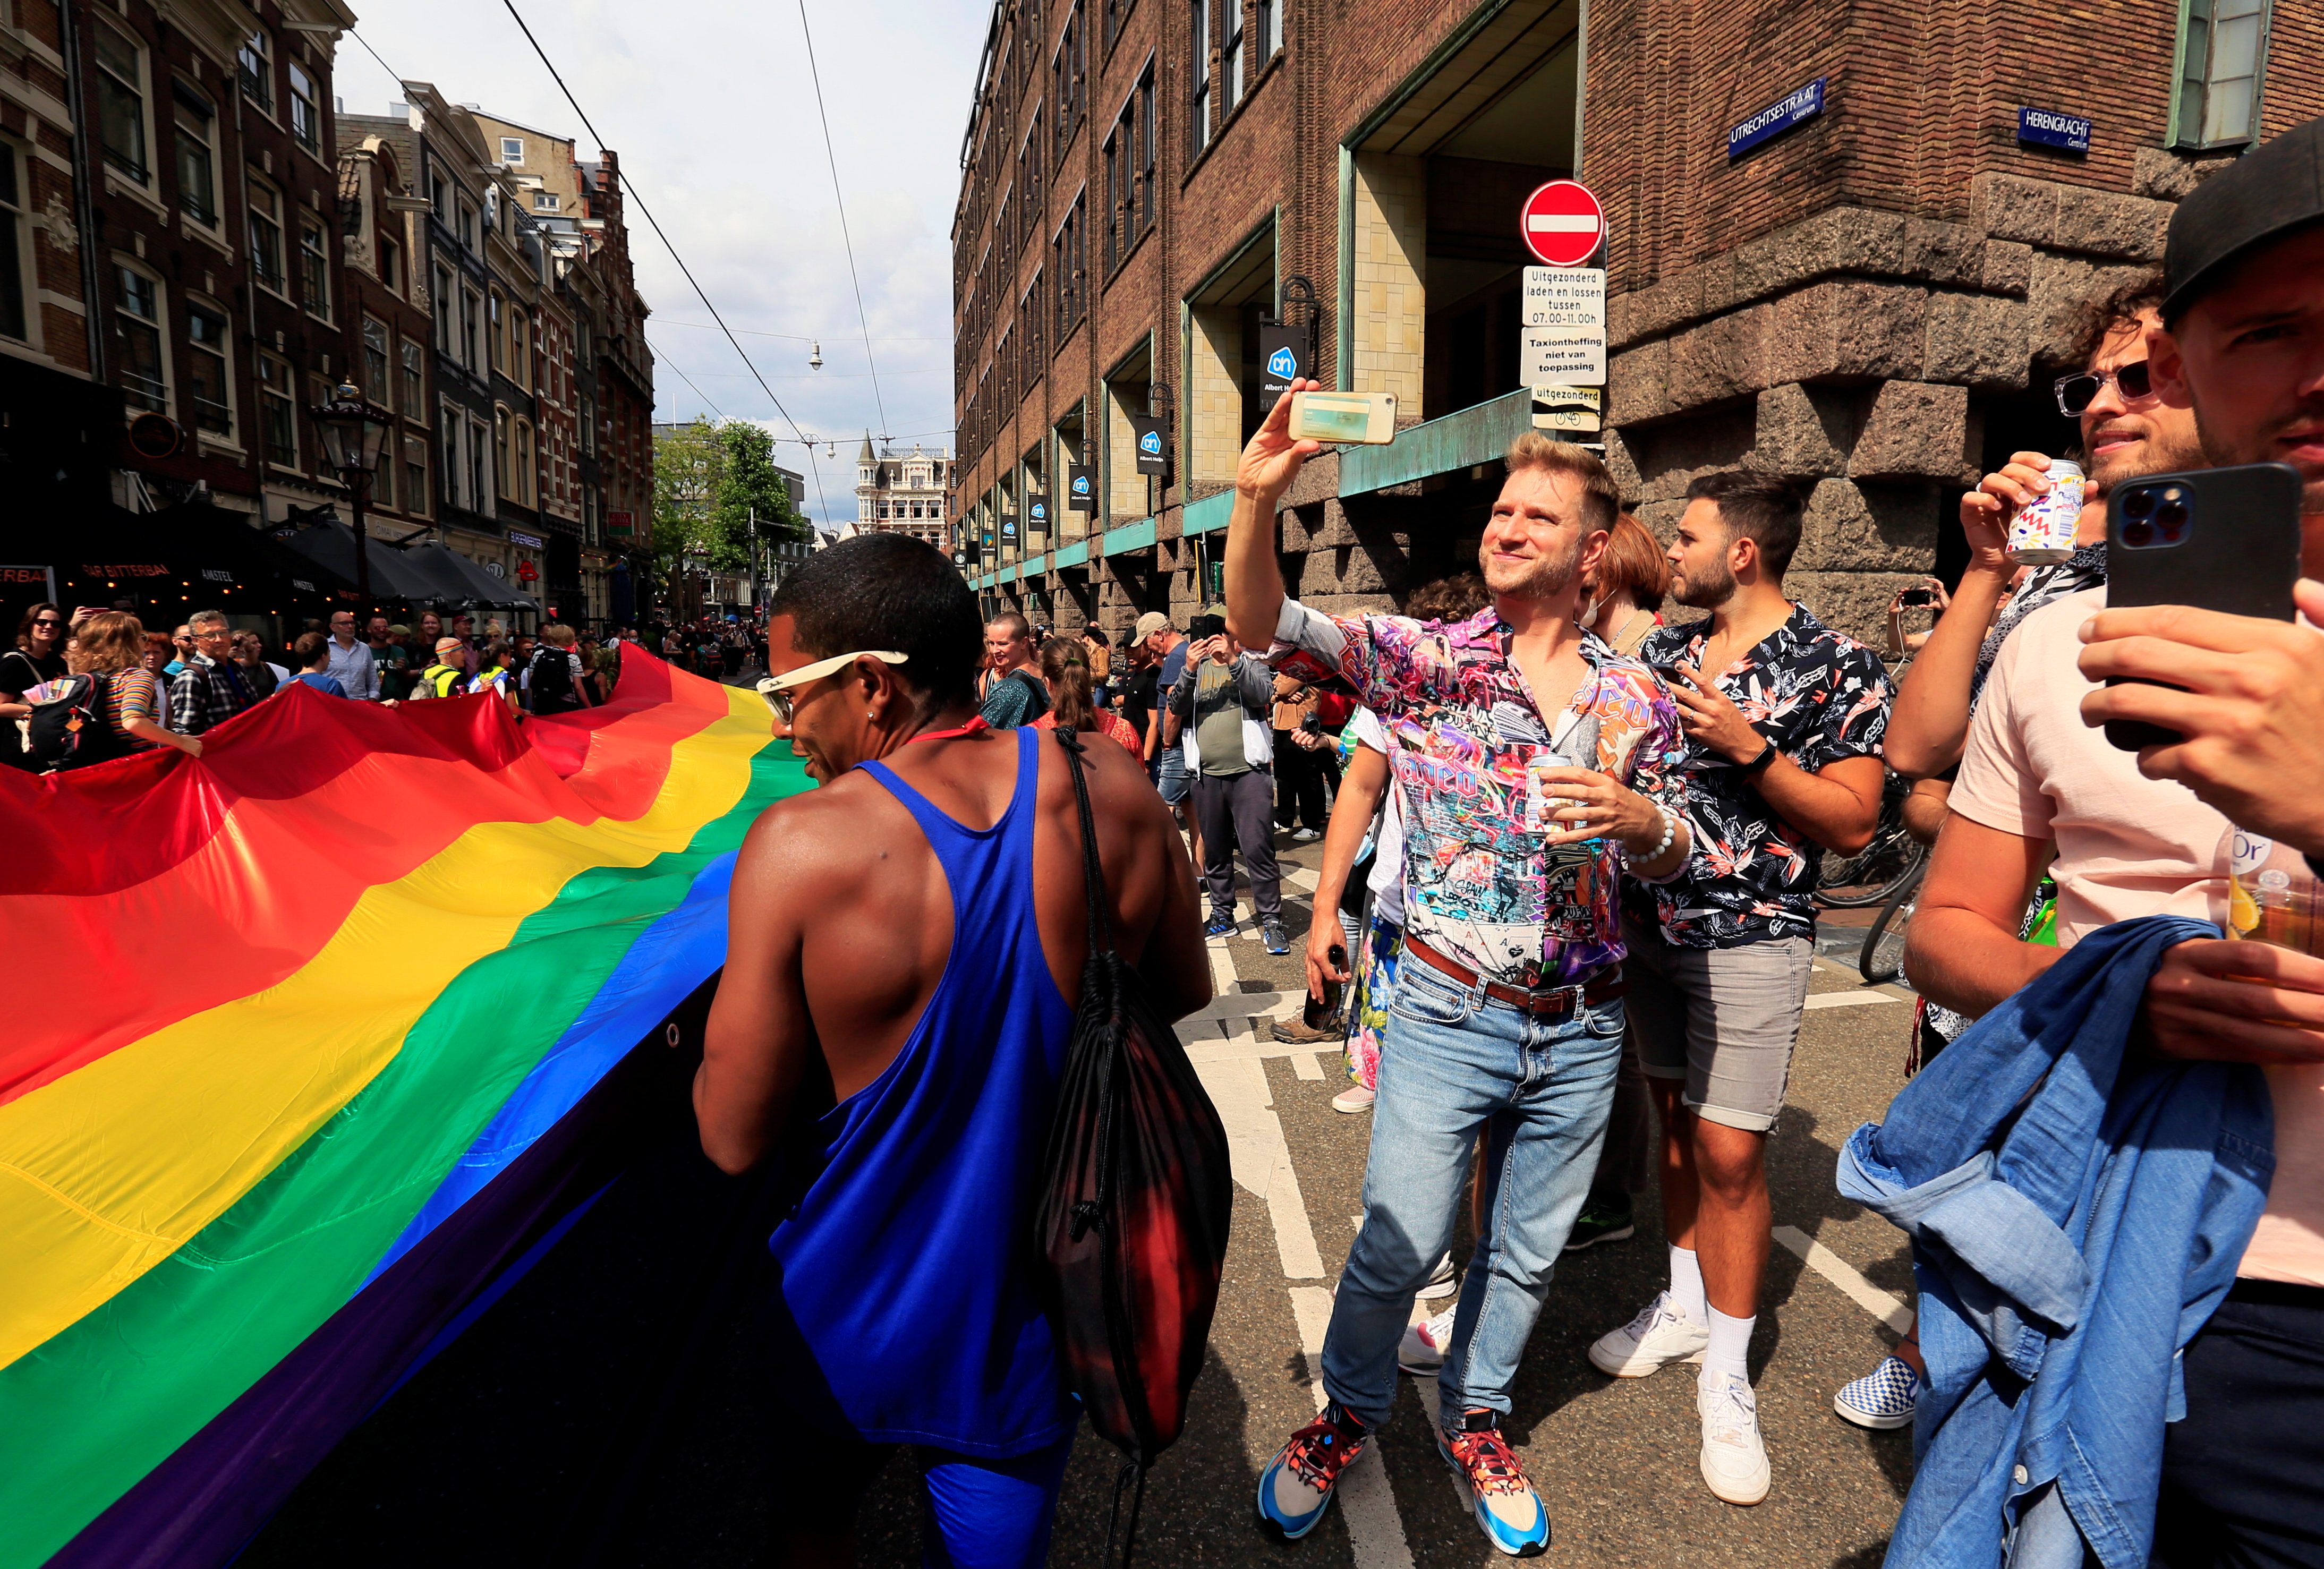 Amsterdam substitutes 'Pride Walk' for canal parade in 25th anniversary